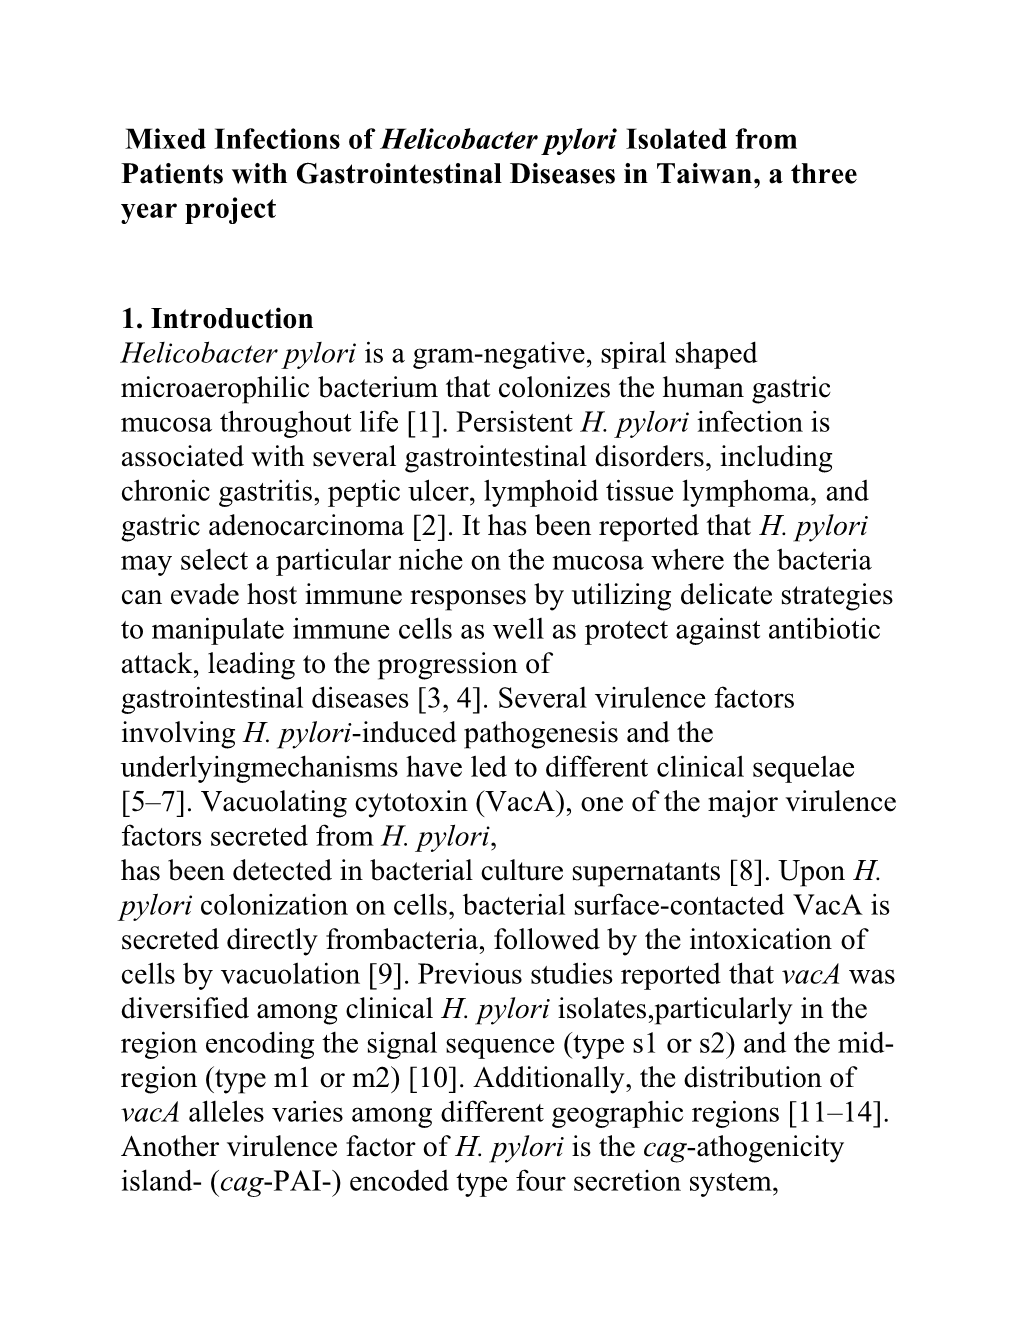 Patients with Gastrointestinal Diseases in Taiwan, a Three Year Project